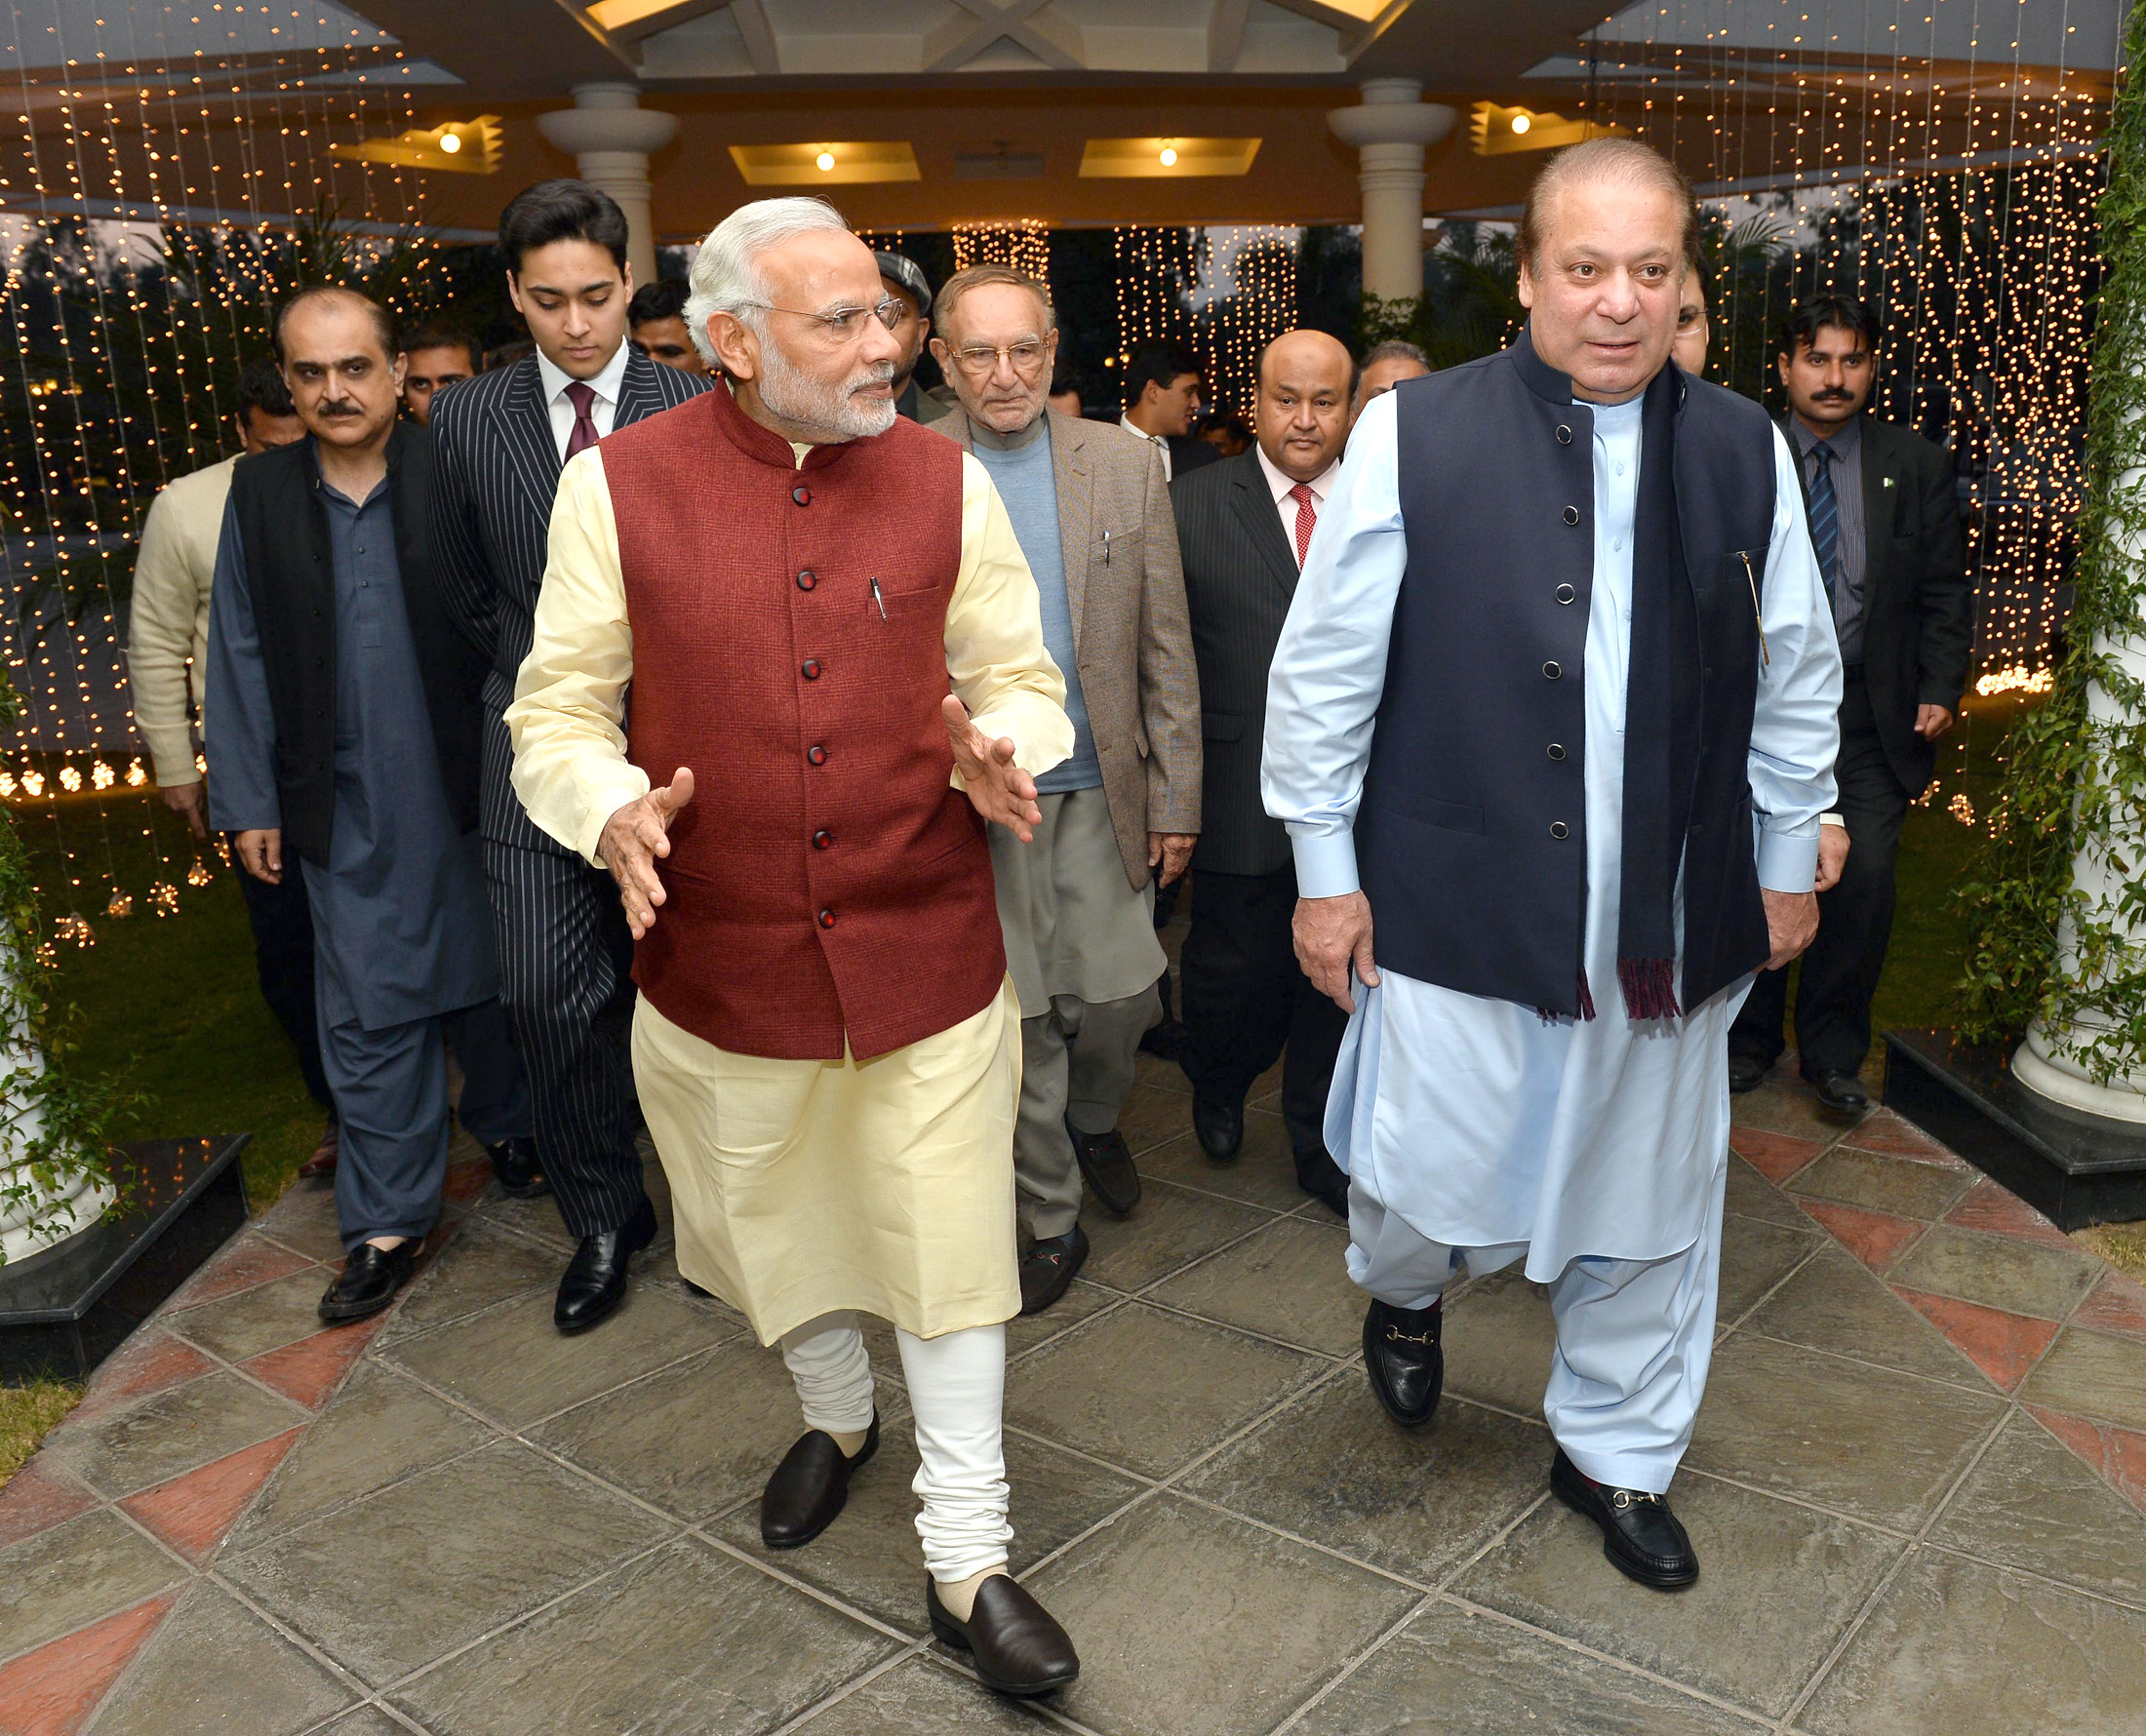 The_Prime_Minister%2C_Shri_Narendra_Modi_visits_the_Prime_Minister_of_Pakistan%2C_Mr._Nawaz_Sharif%27s_home_in_Raiwind%2C_where_his_grand-daughter%27s_wedding_is_being_held%2C_in_Pakistan_on_December_25%2C_2015_%283%29.jpg